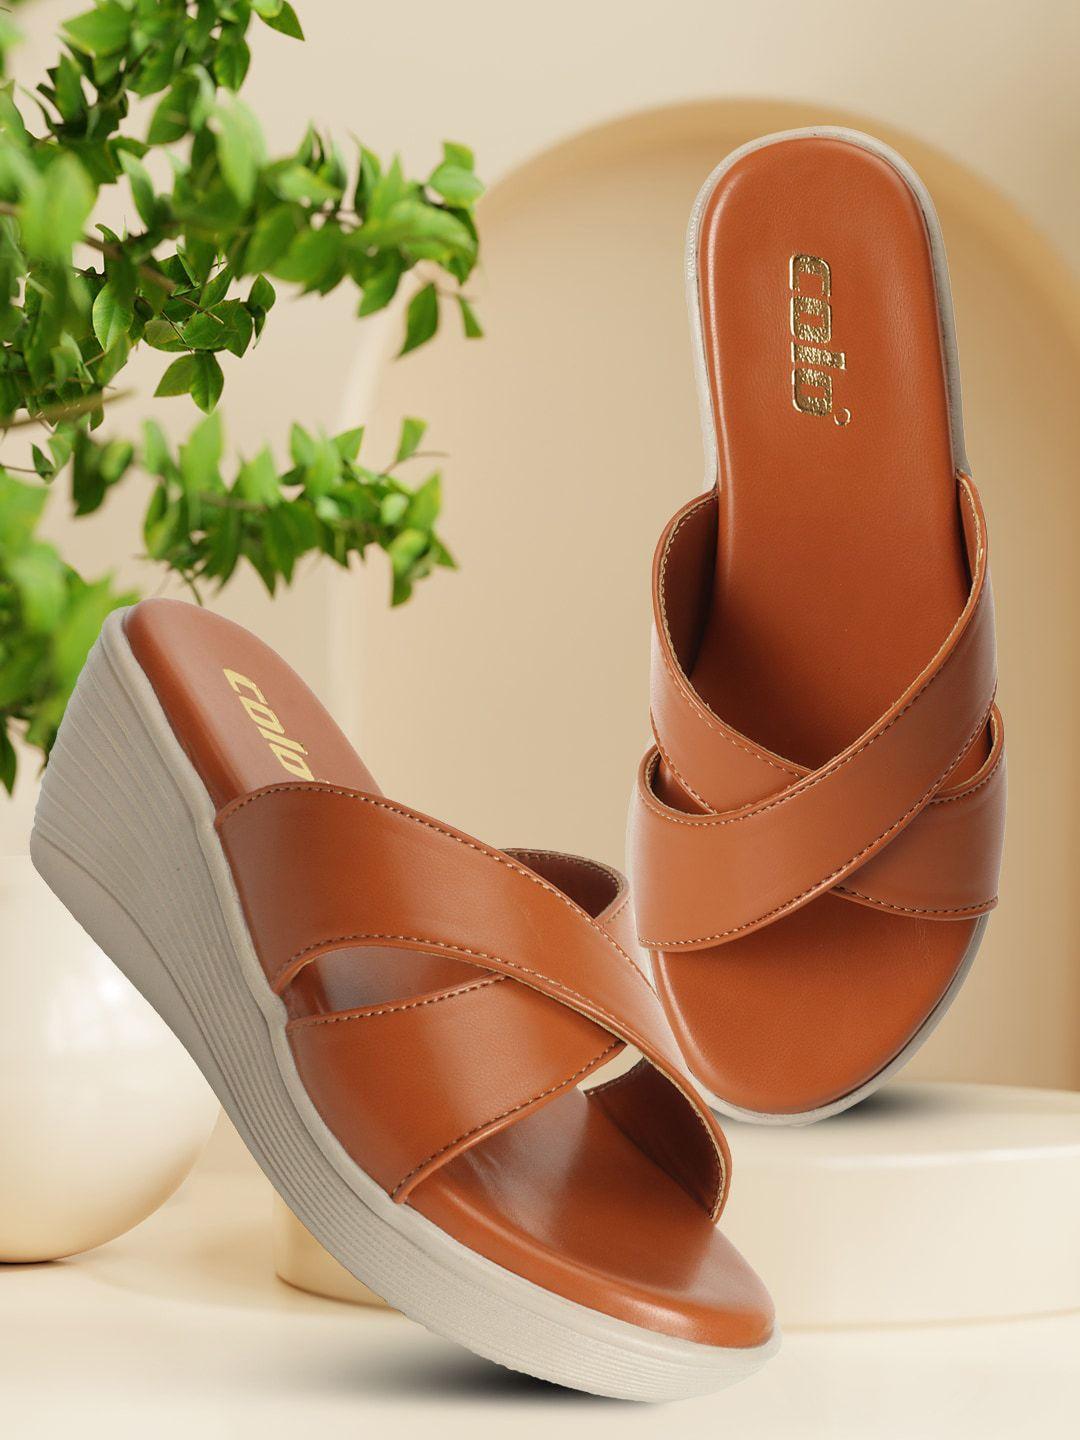 colo wedge sandals